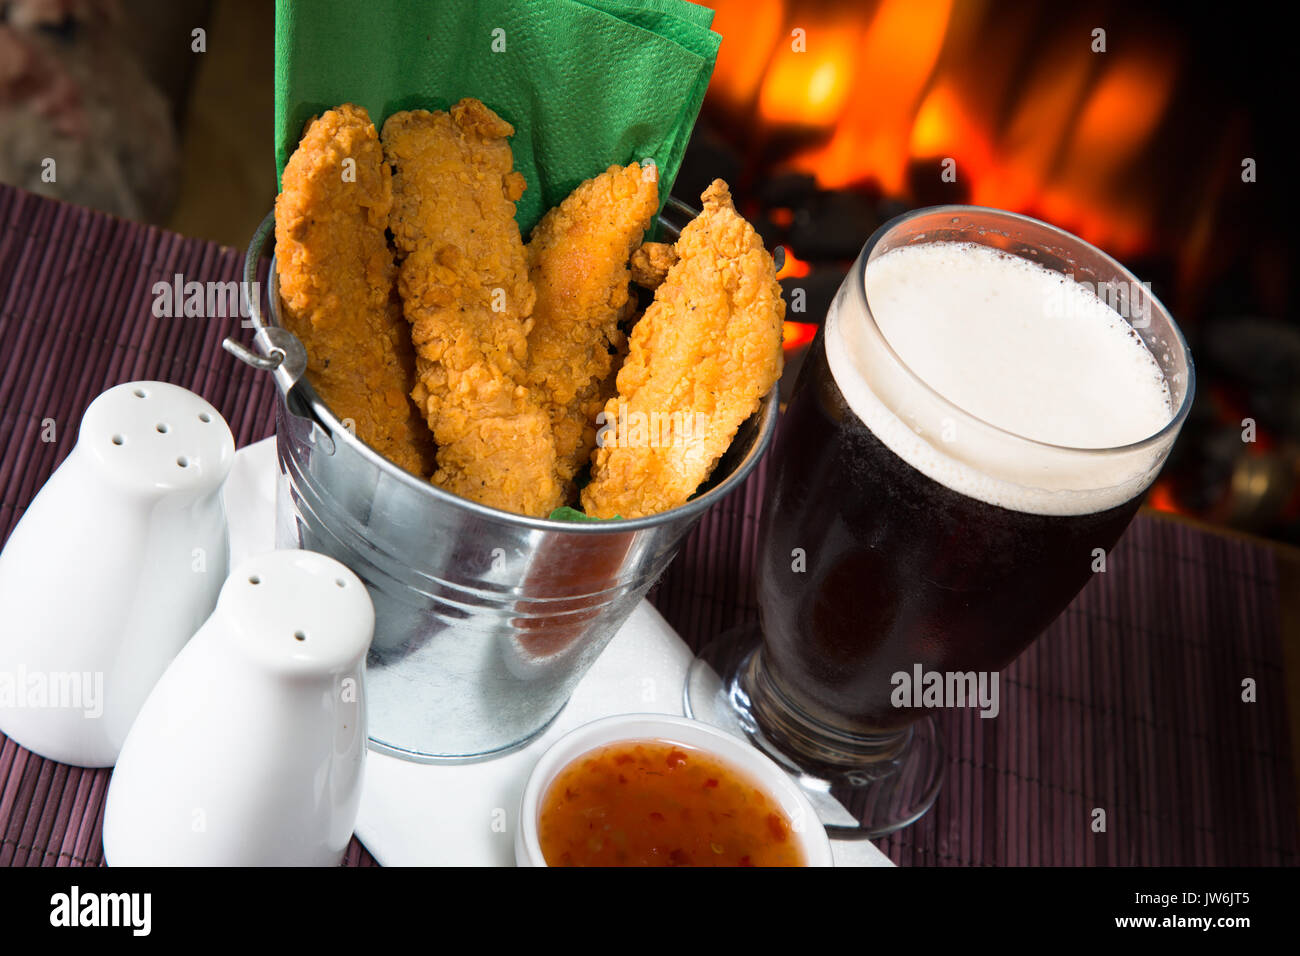 A pub/restaurant lunch/ snack of Hot and Spicy breaded Chicken fillets with a Sweet Chili dip and a glass of ale. Stock Photo